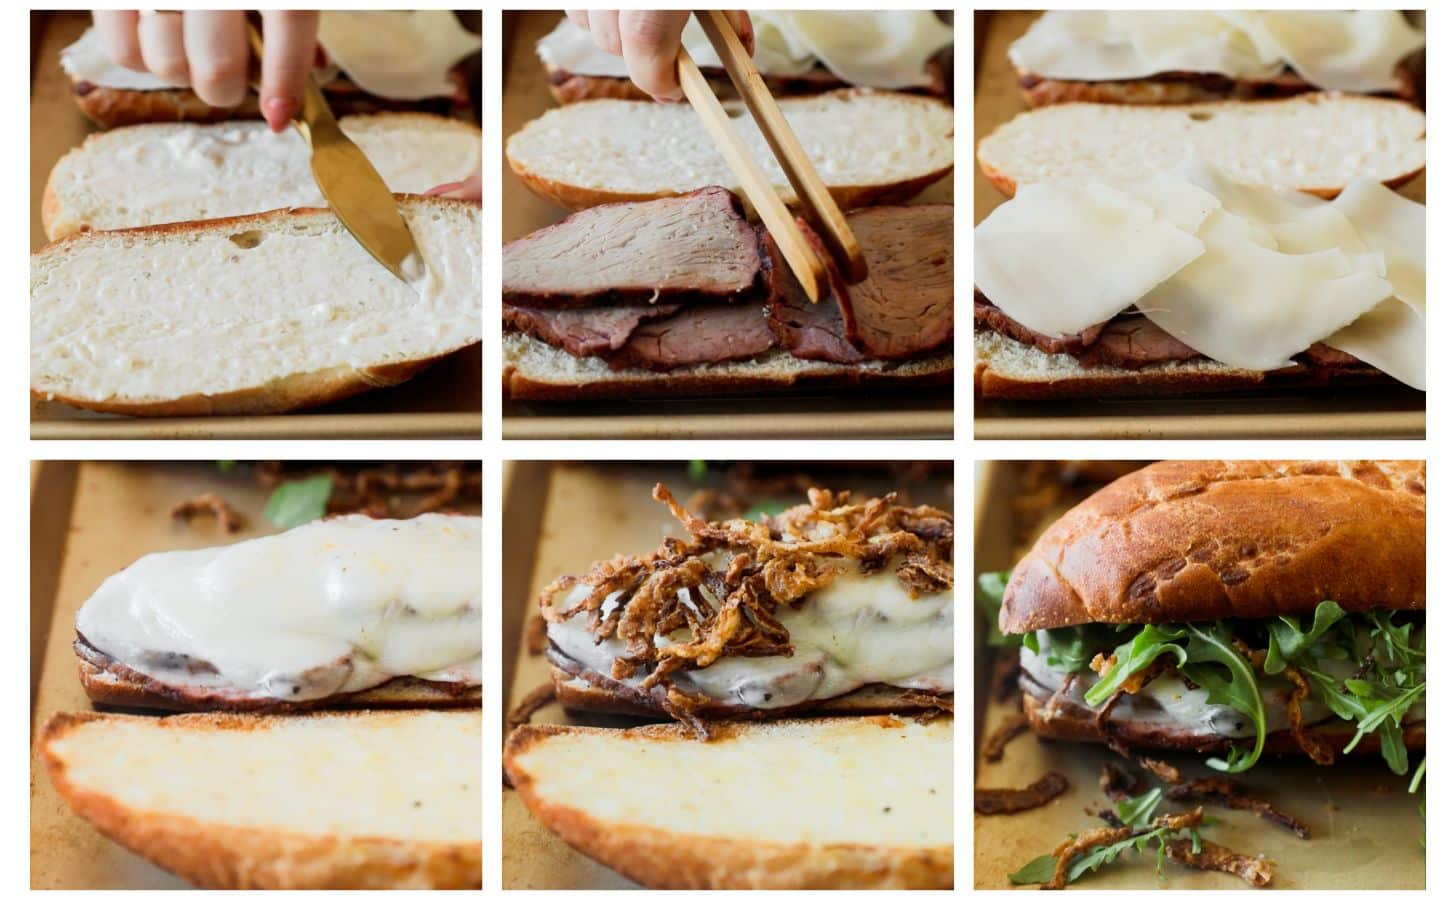 Six steps to making steak sandwiches. In photo 1, a hand uses a gold knife to spread garlic aioli on a roll placed on a gold sheet pan. In photo 2, the hand uses wood tongs to lay steak on the roll. In photo 3, the steak is topped with provolone. In photo 4, he provolone is melted. In photo 5, the sandwich is topped with frizzled onions. In photo 6, the sandwich is topped with arugula and a bun.